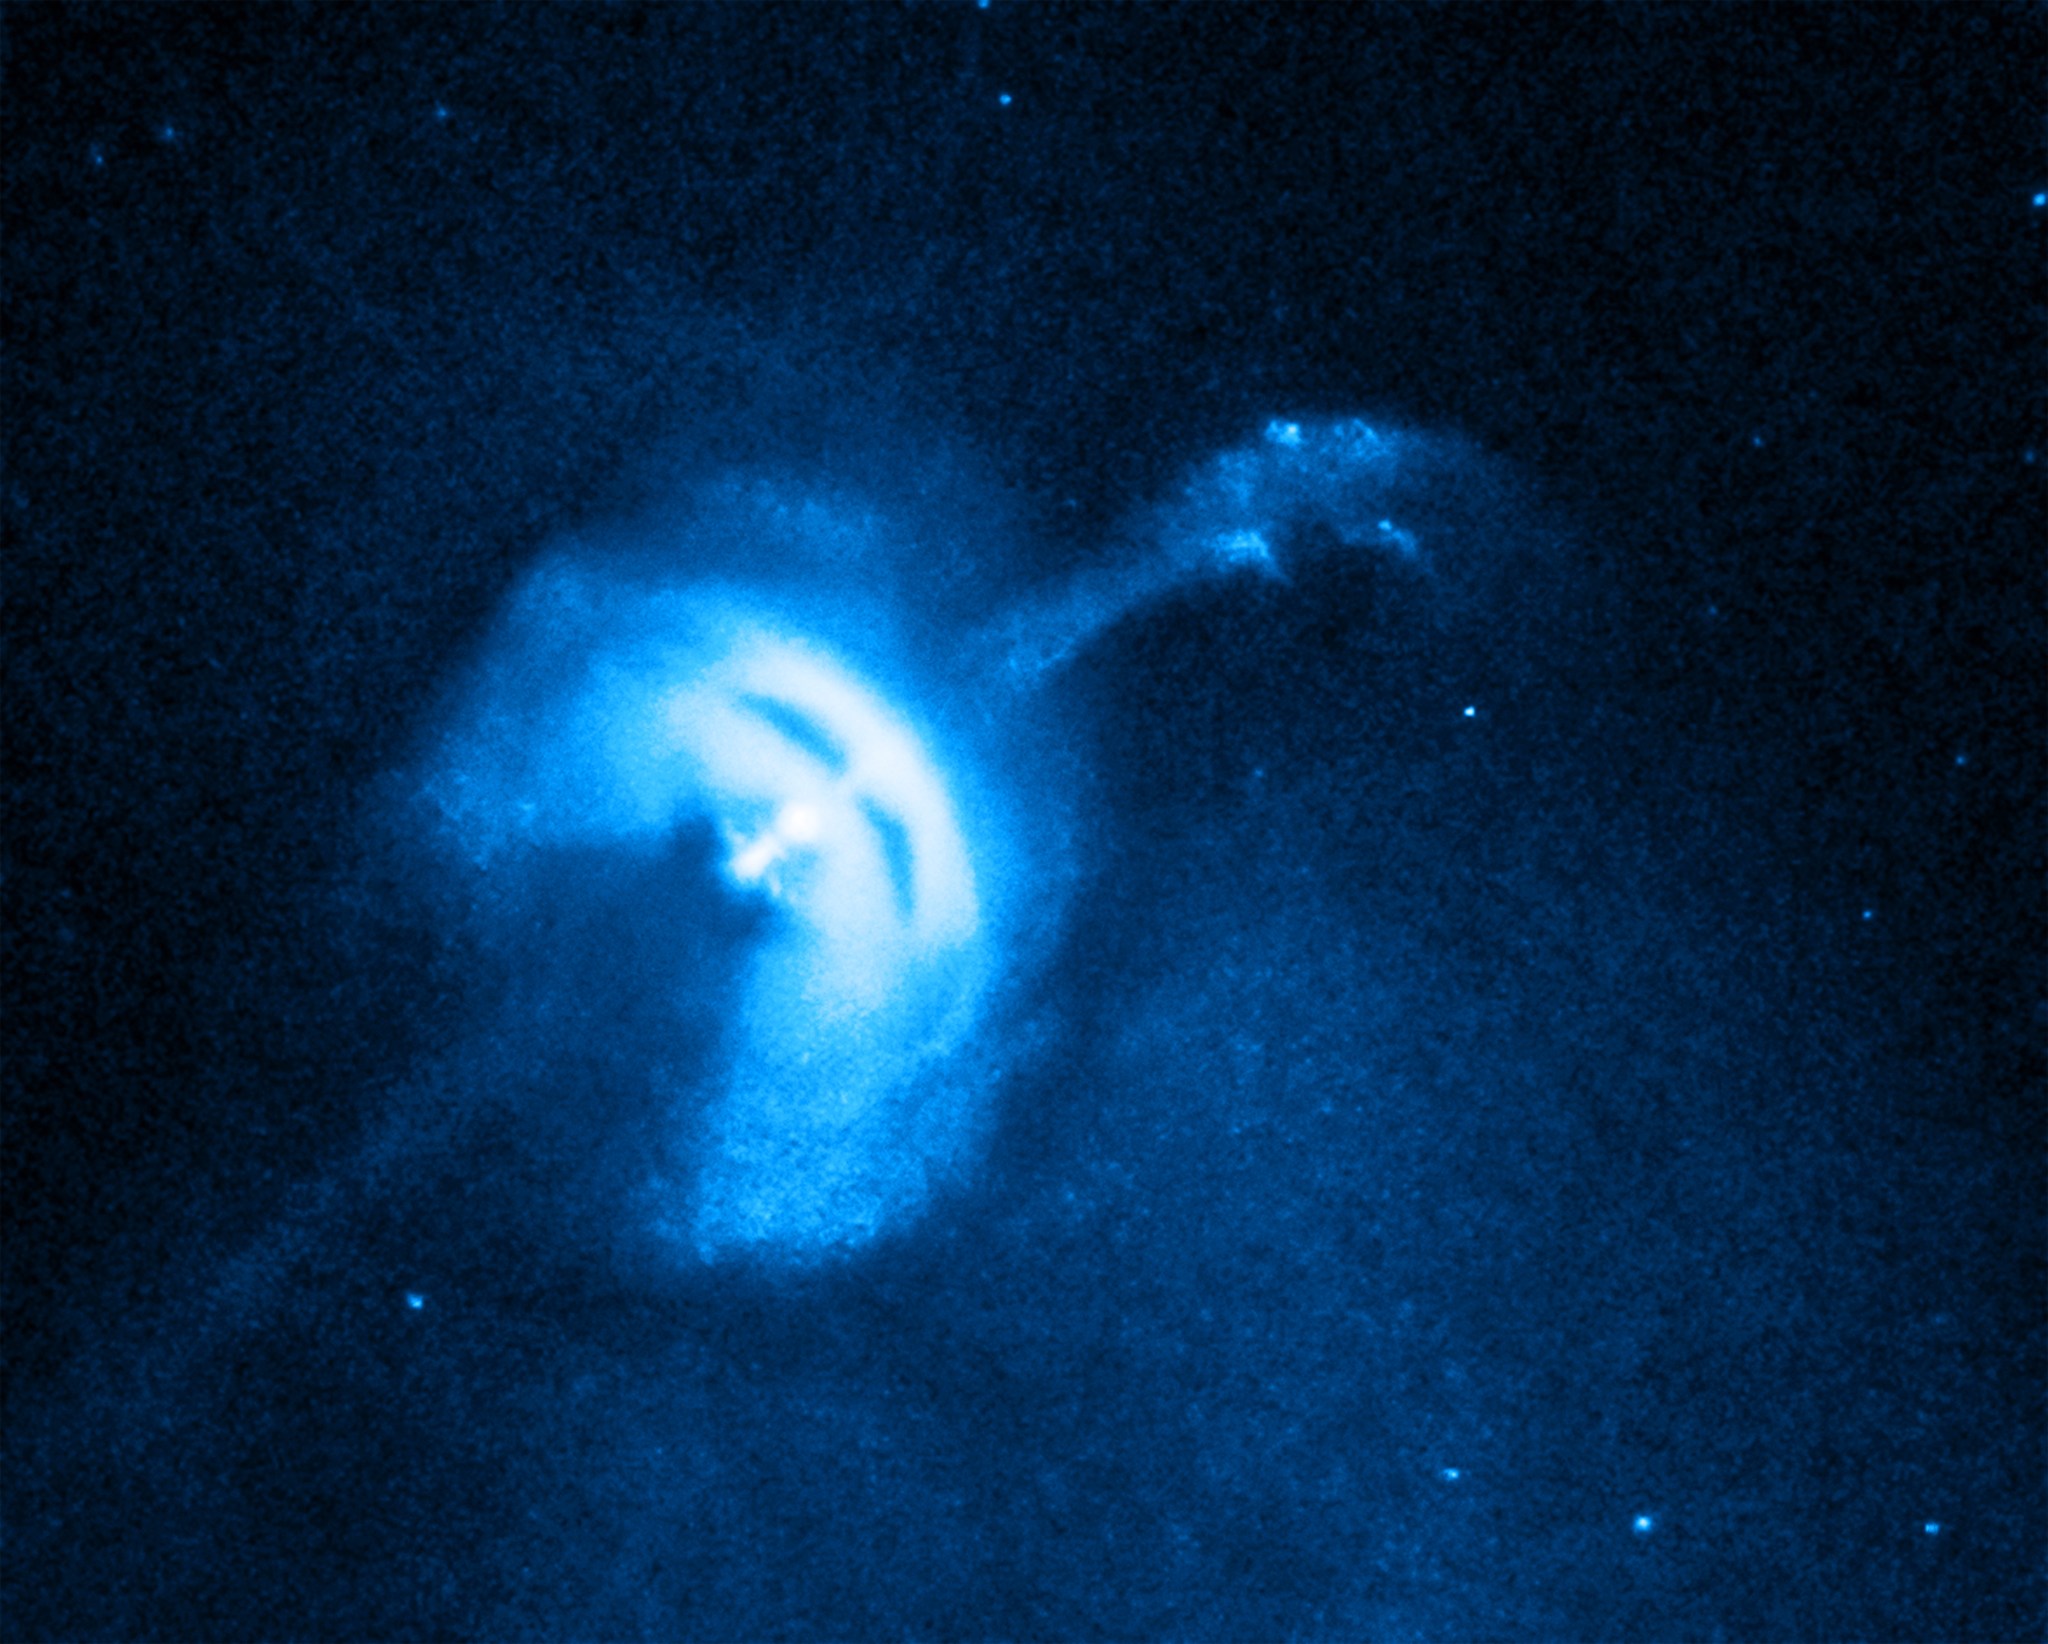 The Vela pulsar, a neutron star that was formed when a massive star collapsed.